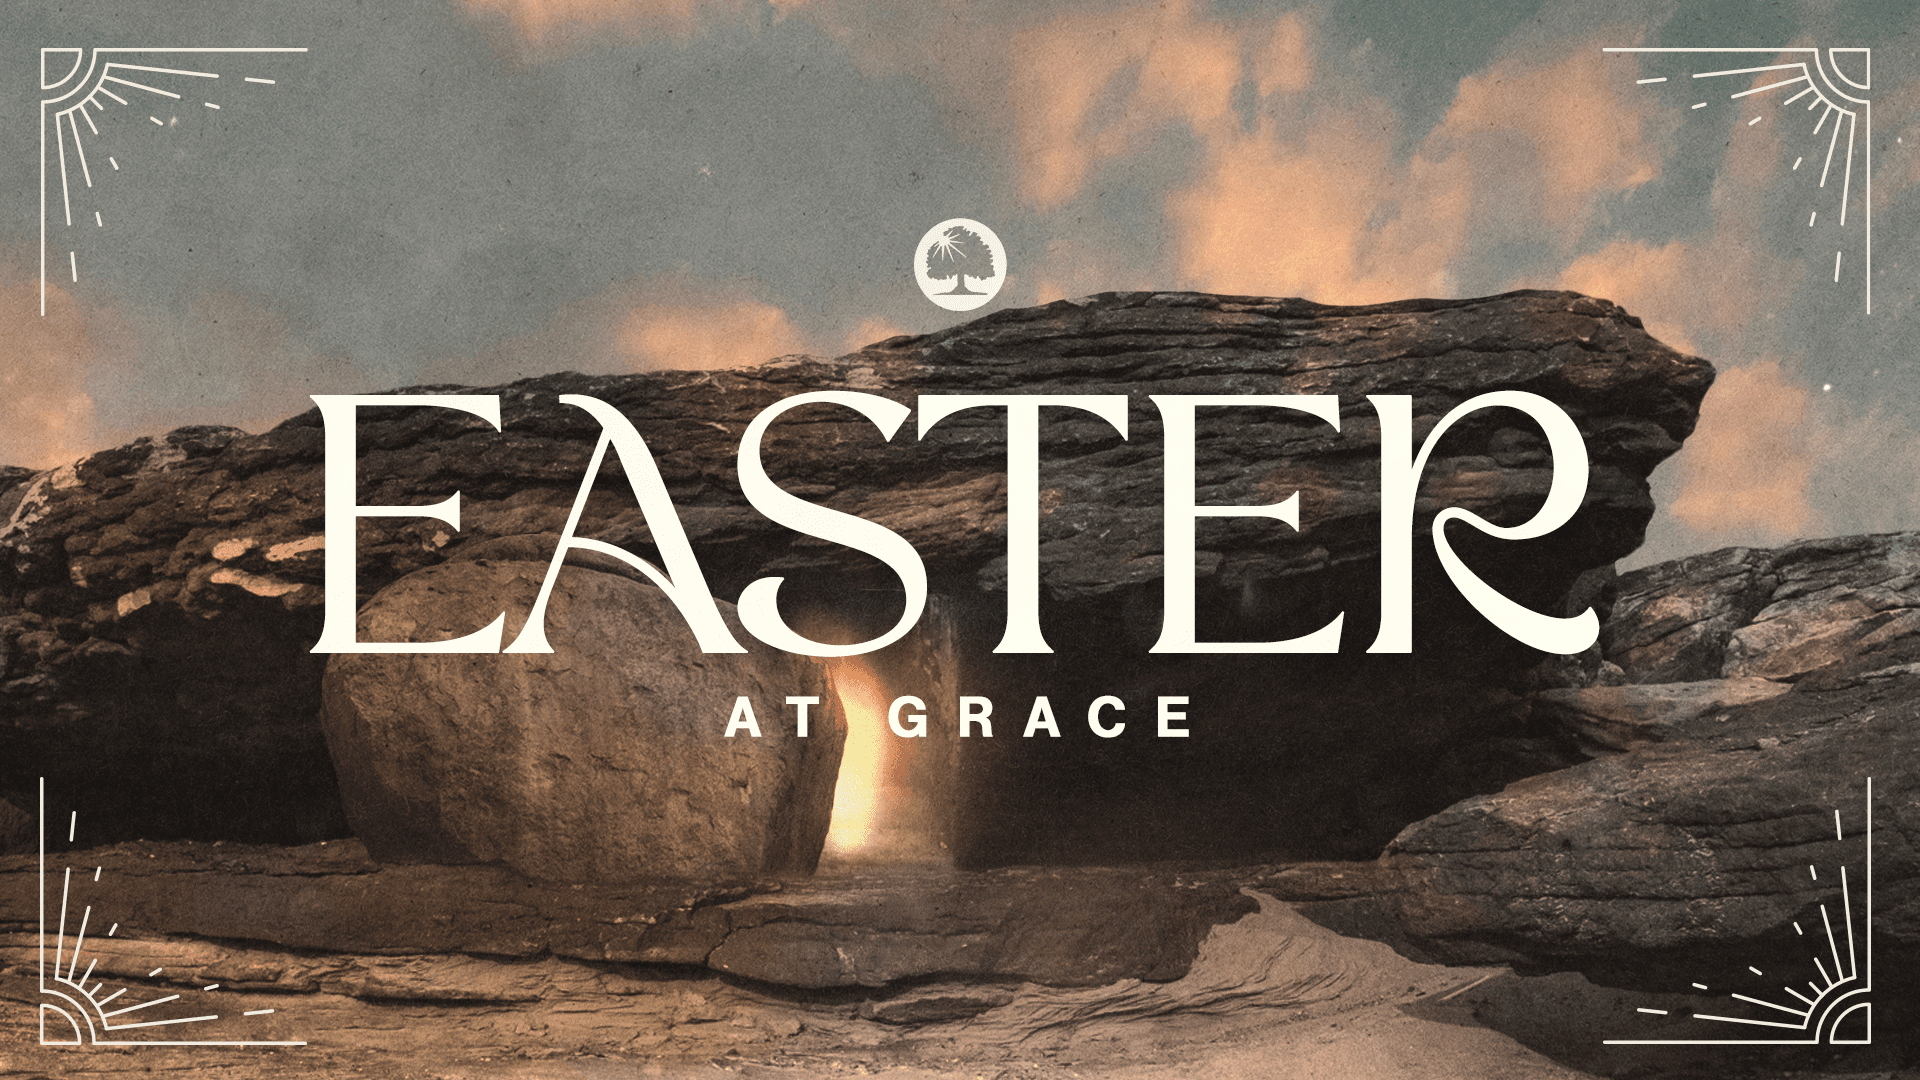 Easter at grace church